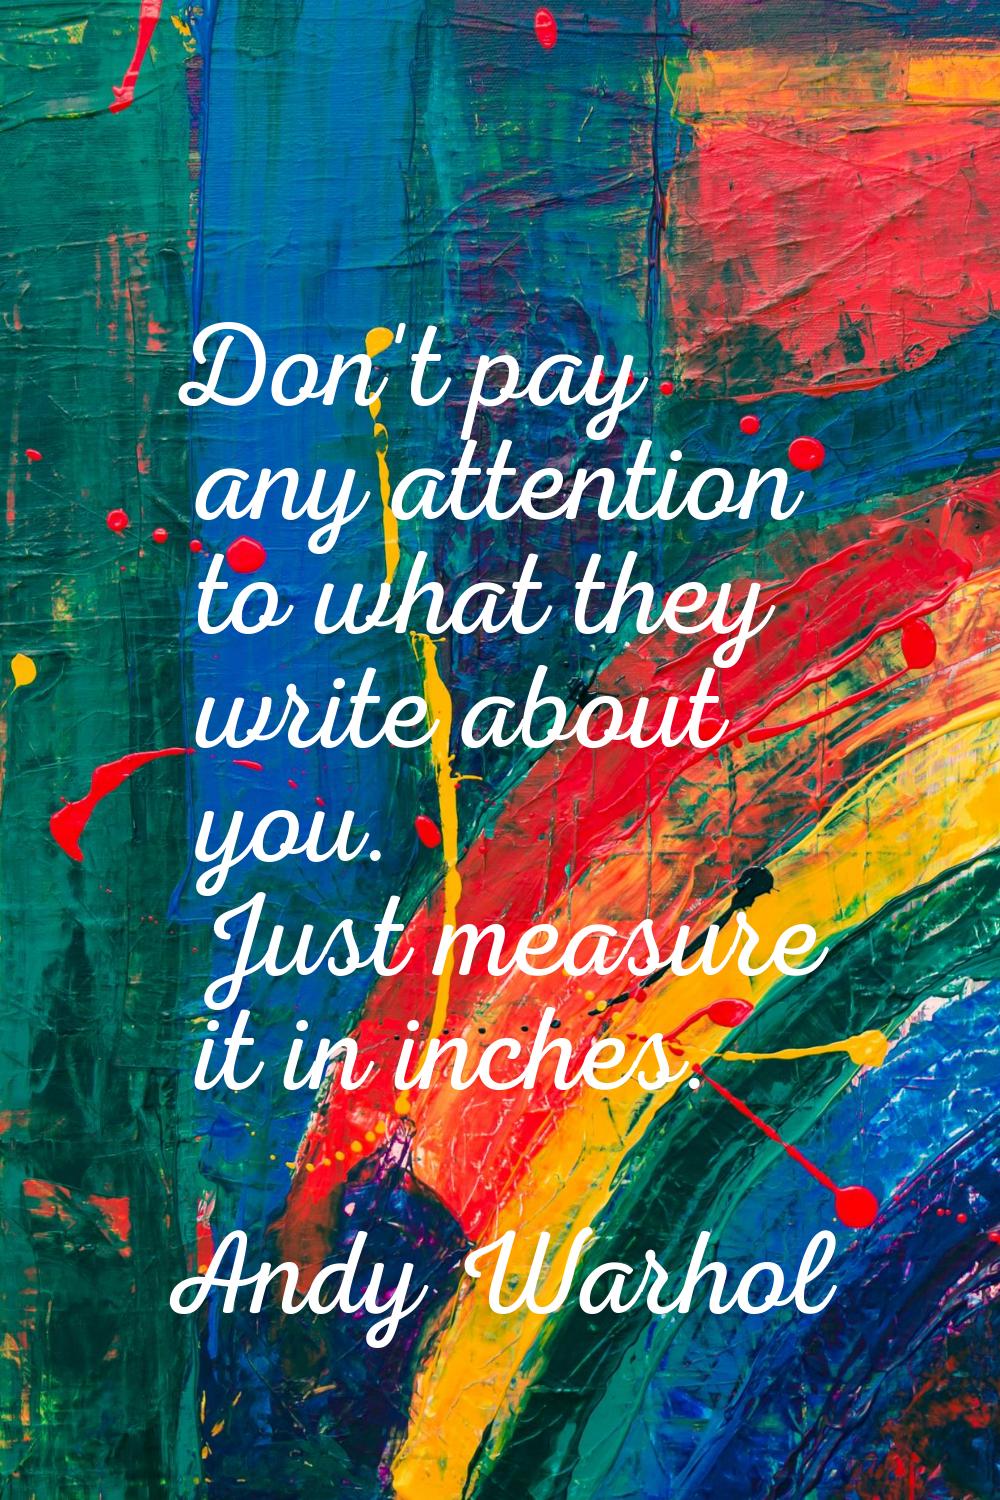 Don't pay any attention to what they write about you. Just measure it in inches.